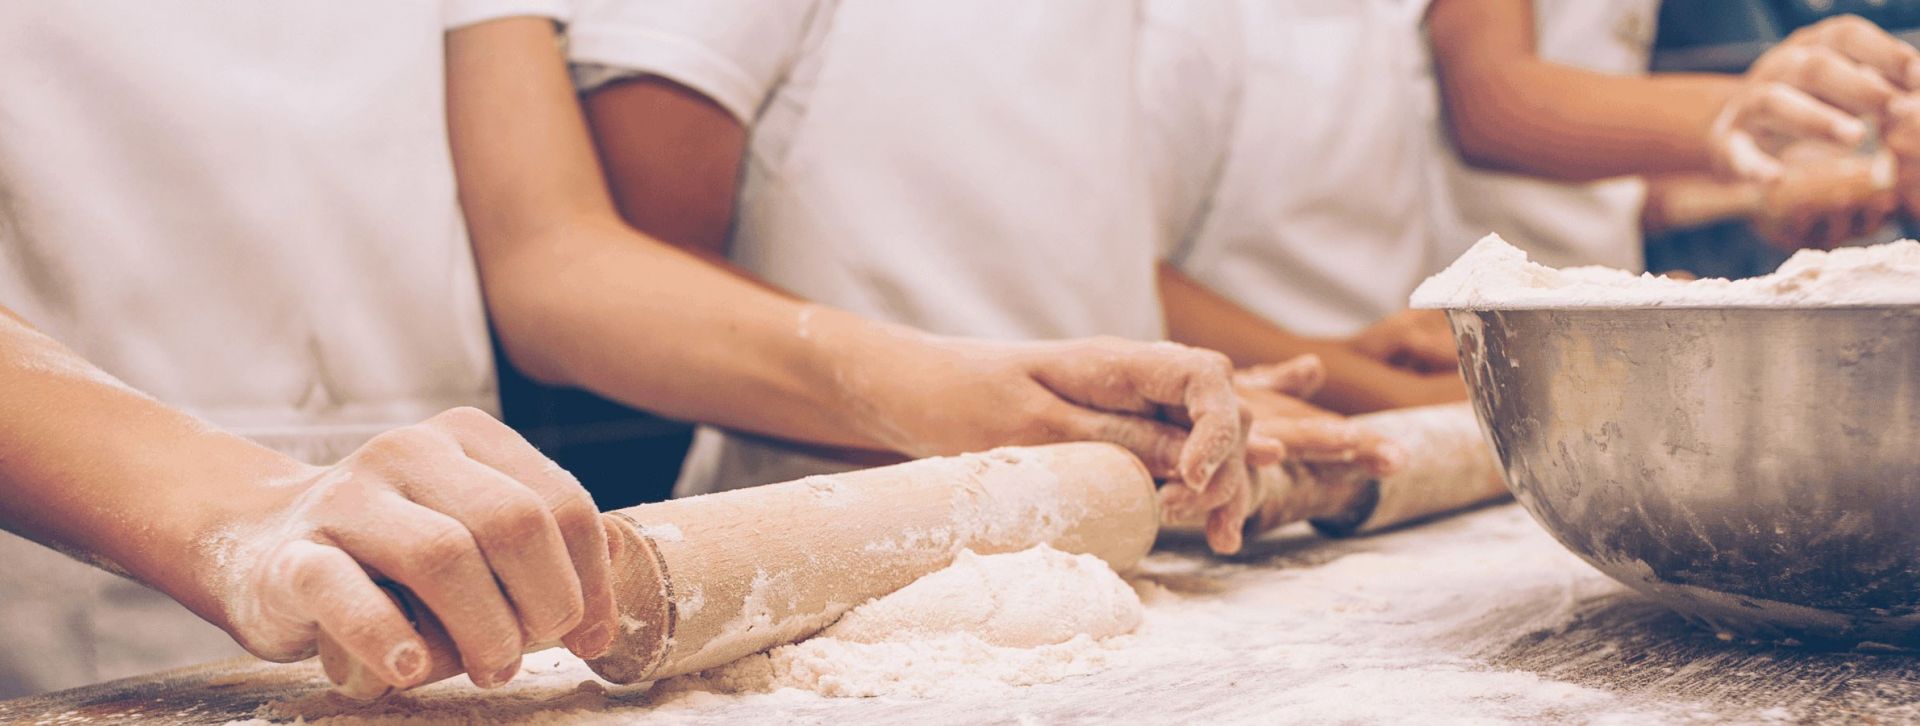 Rolling pin rolling out dough on cutting board